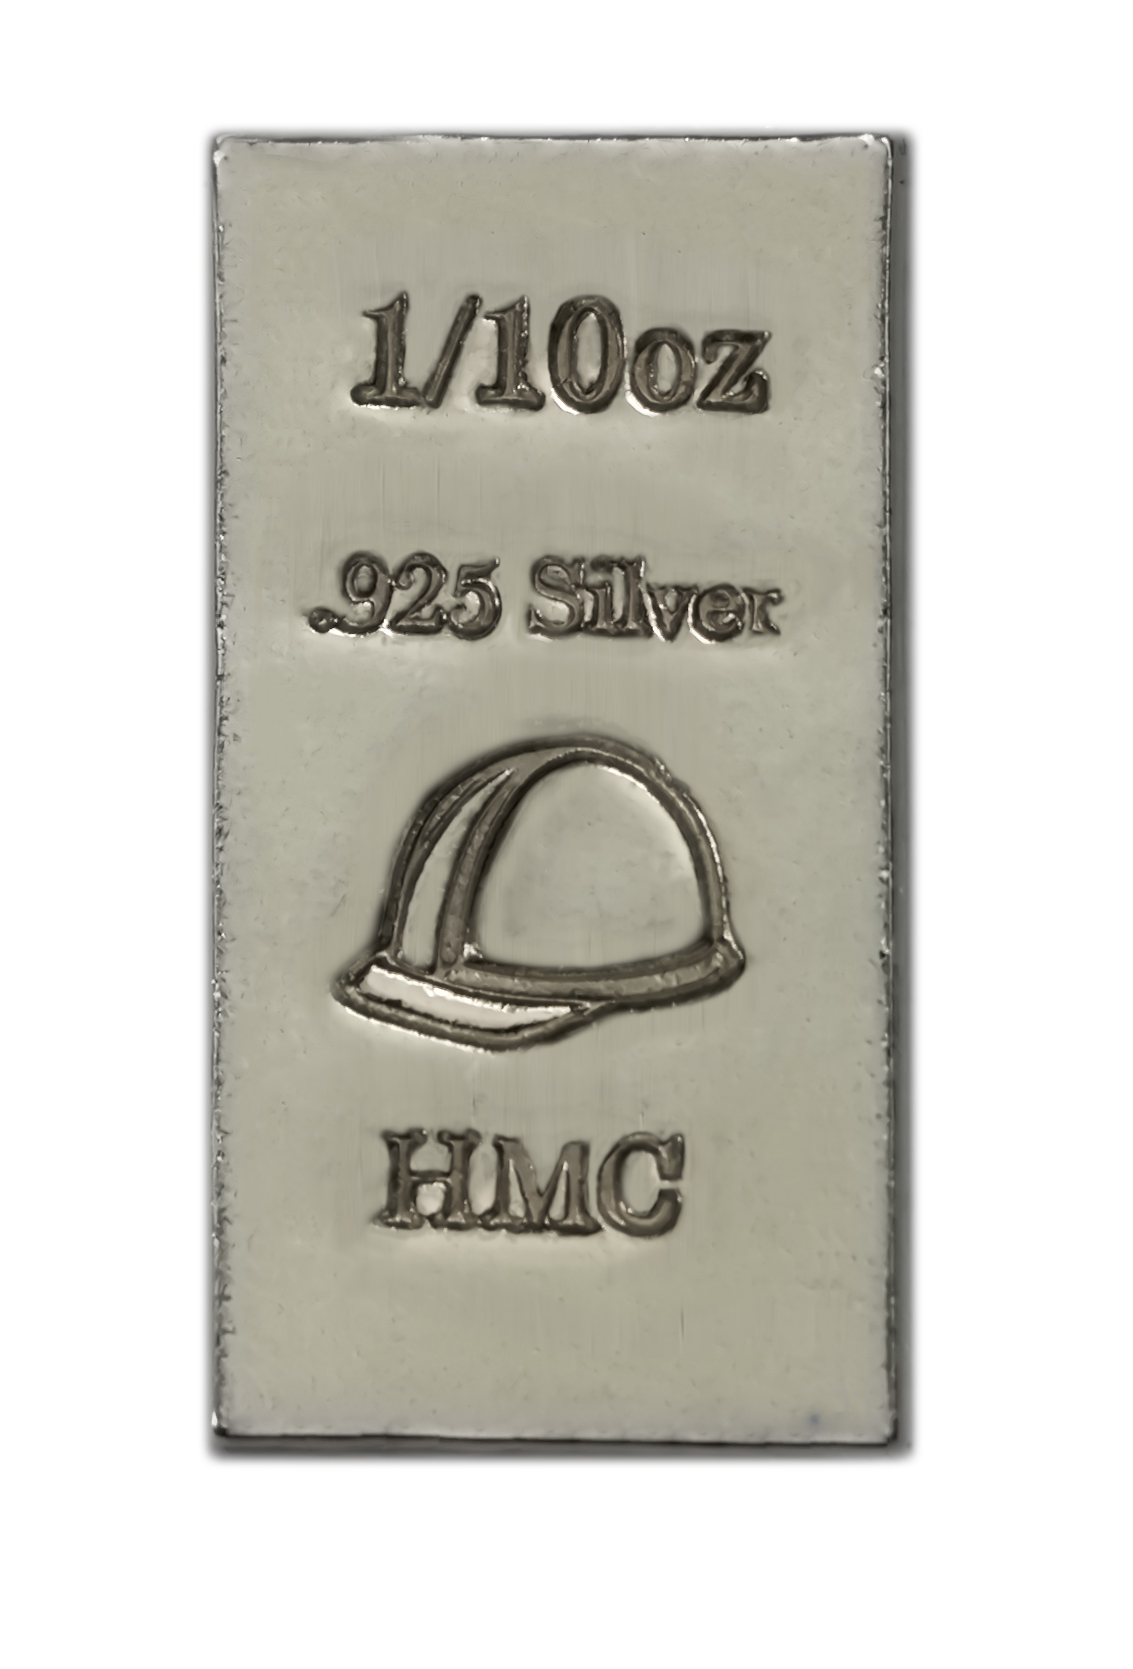 NEW RELEASE: 1/10-oz Sterling Silver Bars